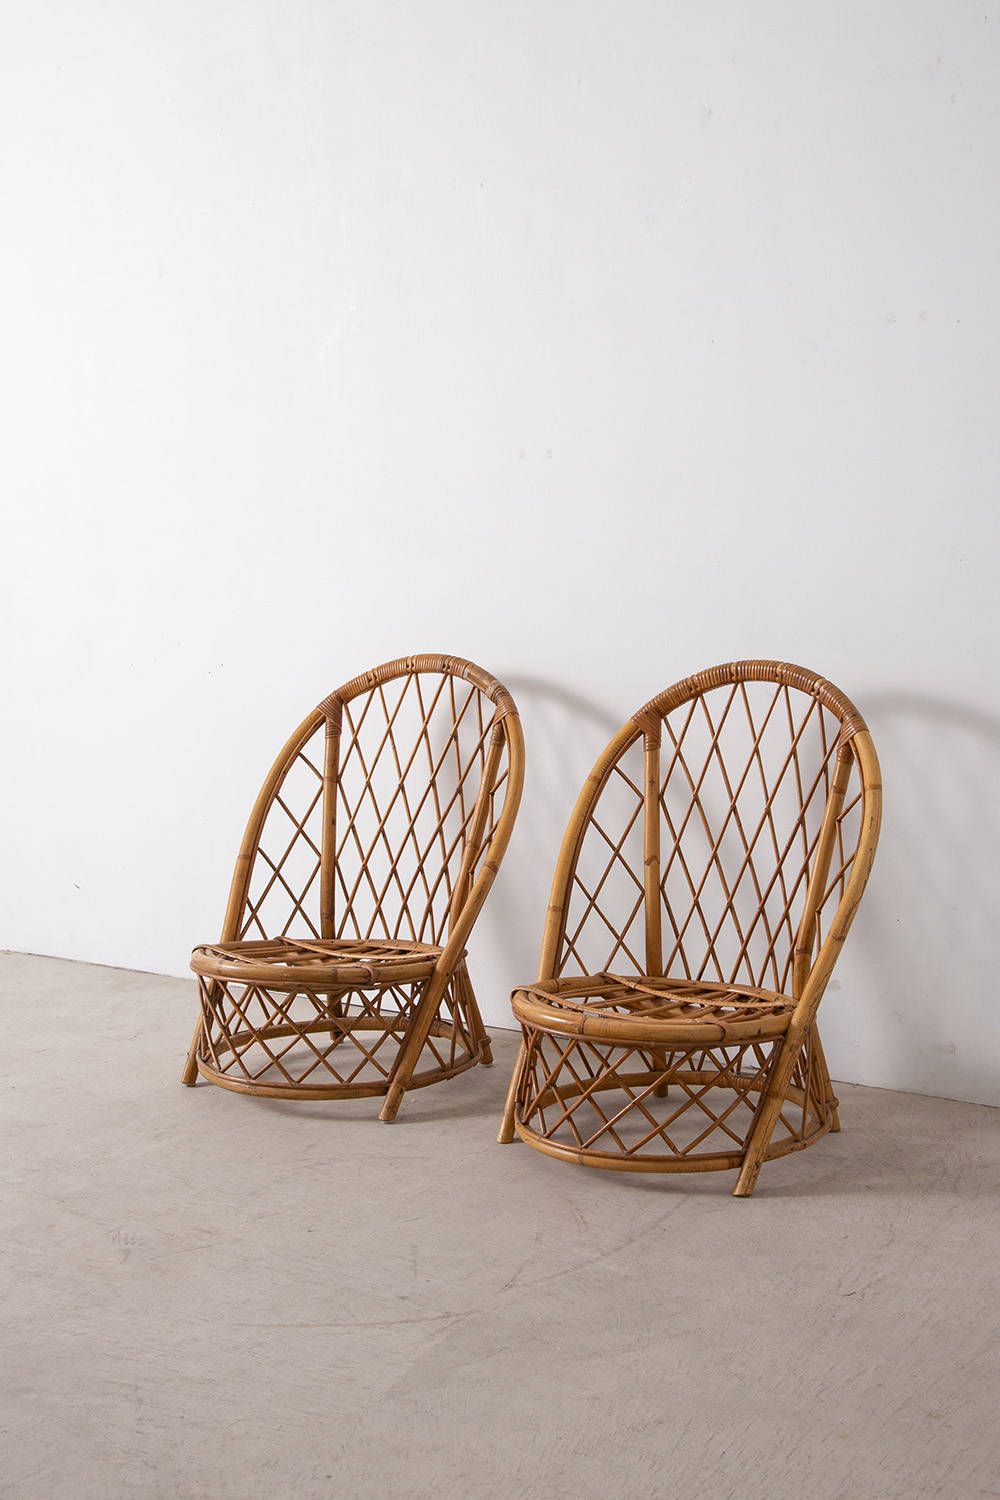 Low Chairs and Magazine Rack by Audoux & Minet in Rattan